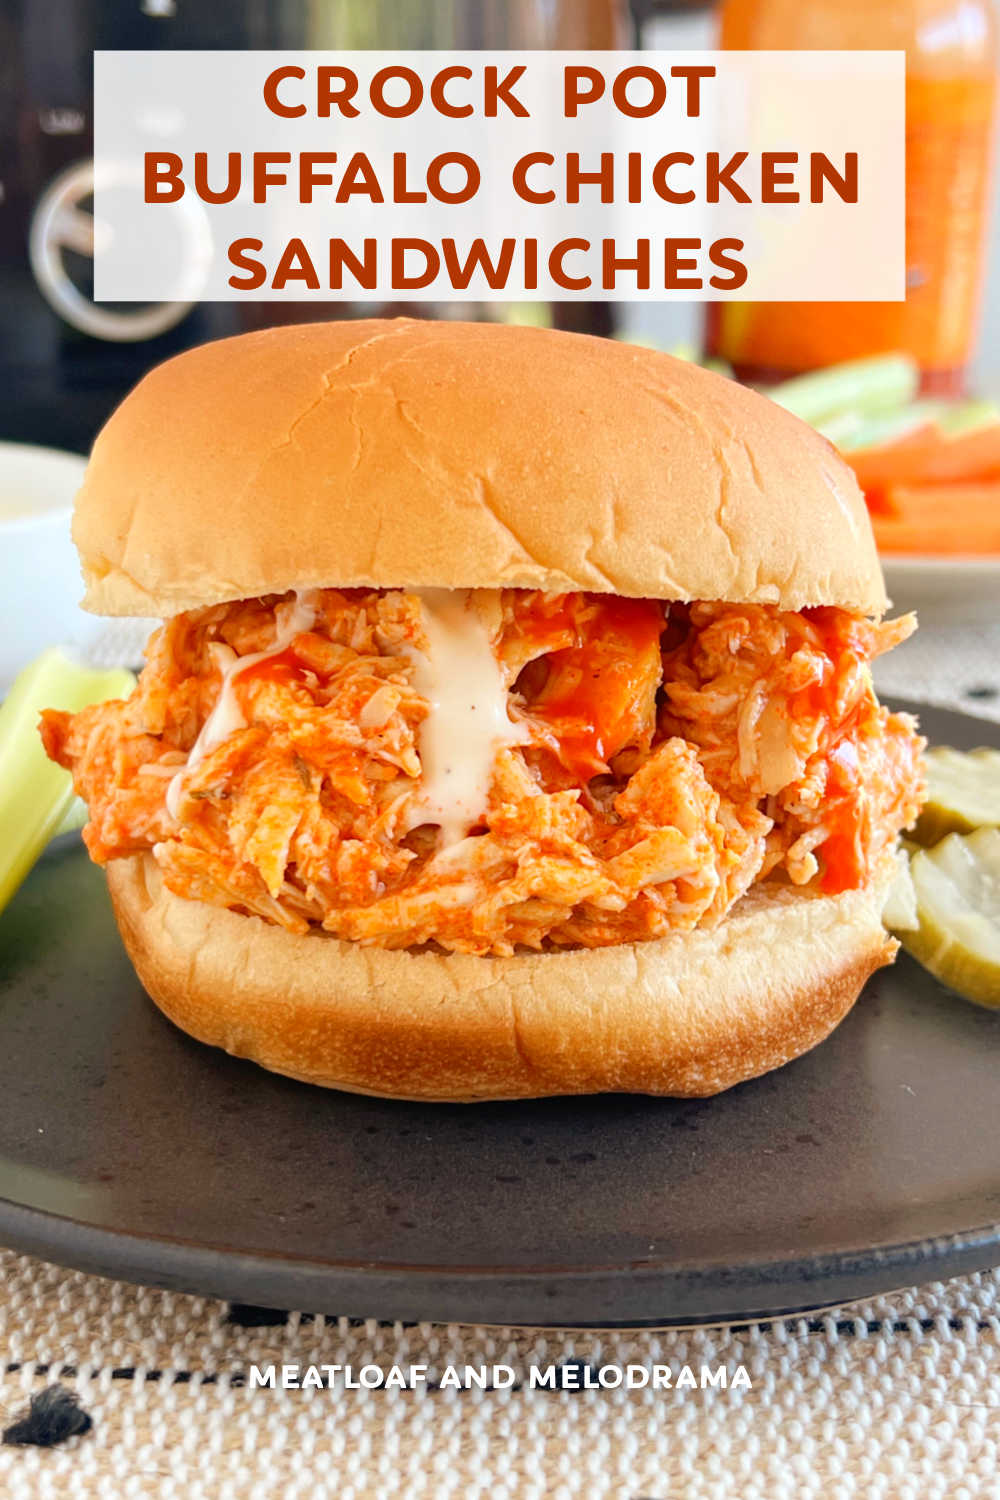 Crock Pot Buffalo Chicken Sandwiches is an easy slow cooker recipe with chicken, Buffalo sauce and ranch dressing mix. This easy chicken recipe is perfect for a quick dinner and a great recipe for game day! via @meamel